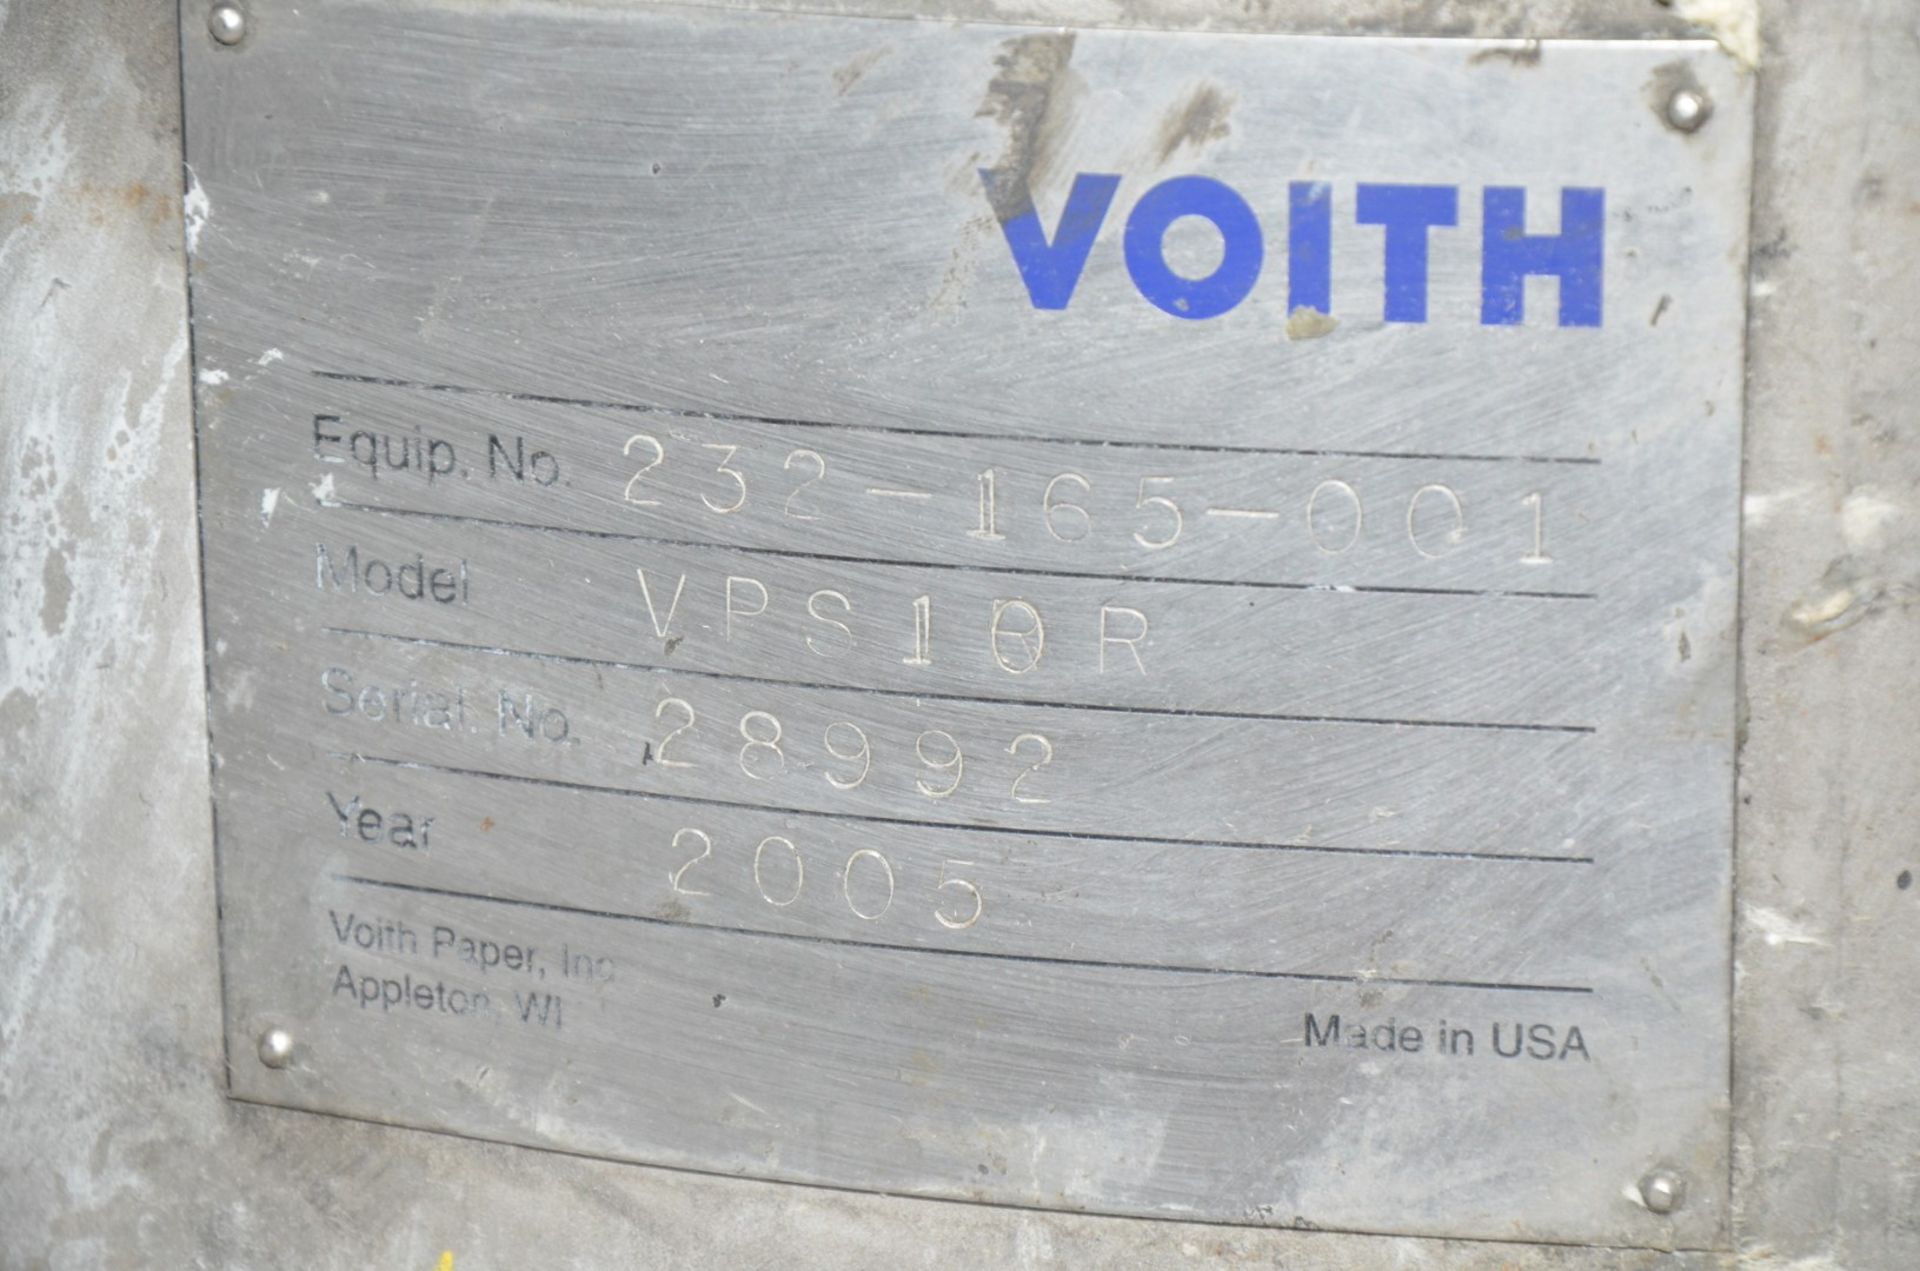 VOITH (2005) VPS 10R STAINLESS STEEL VERTICAL PRESSURE SCREEN WITH 0,006" C-BAR SCREEN BASKET, STEEL - Image 4 of 5